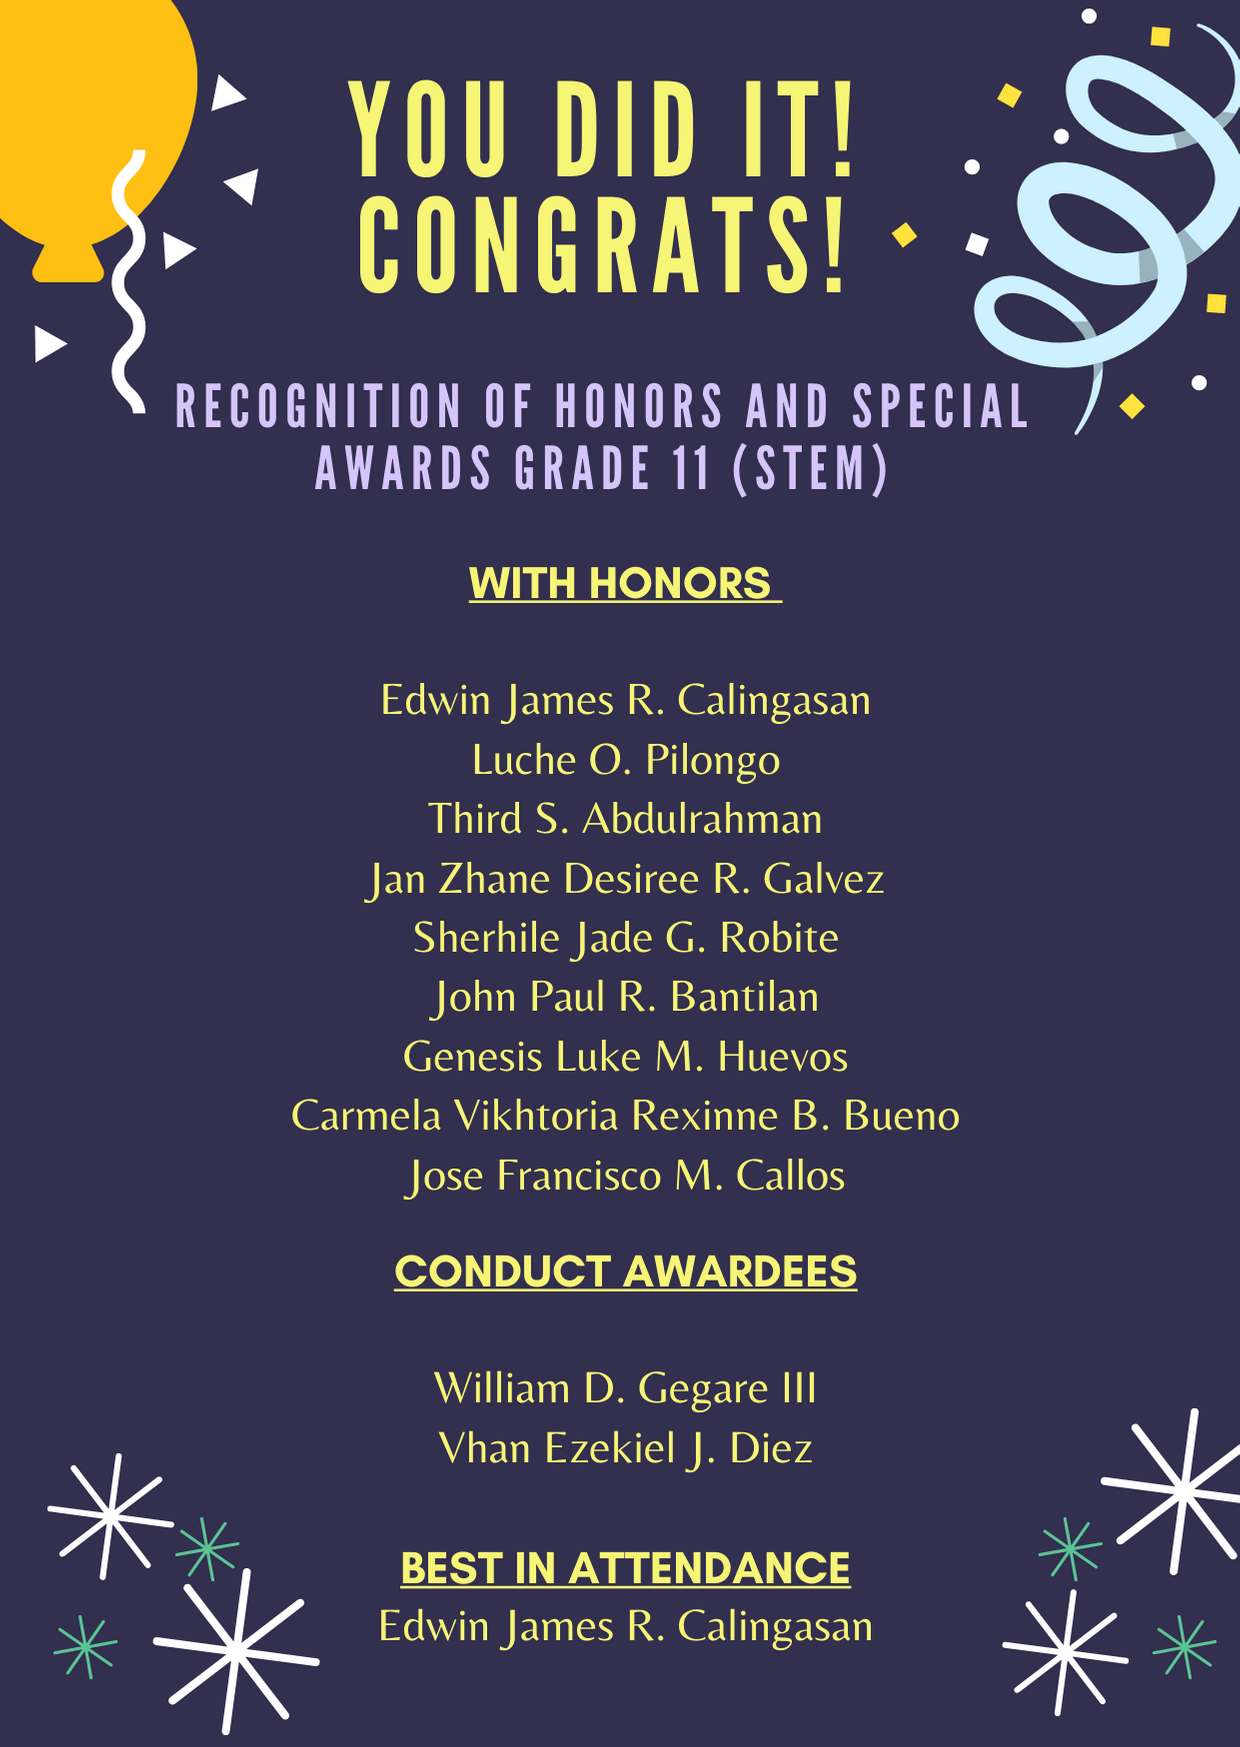 Recognition of Honors and Special Awards Grade 11 (STEM)